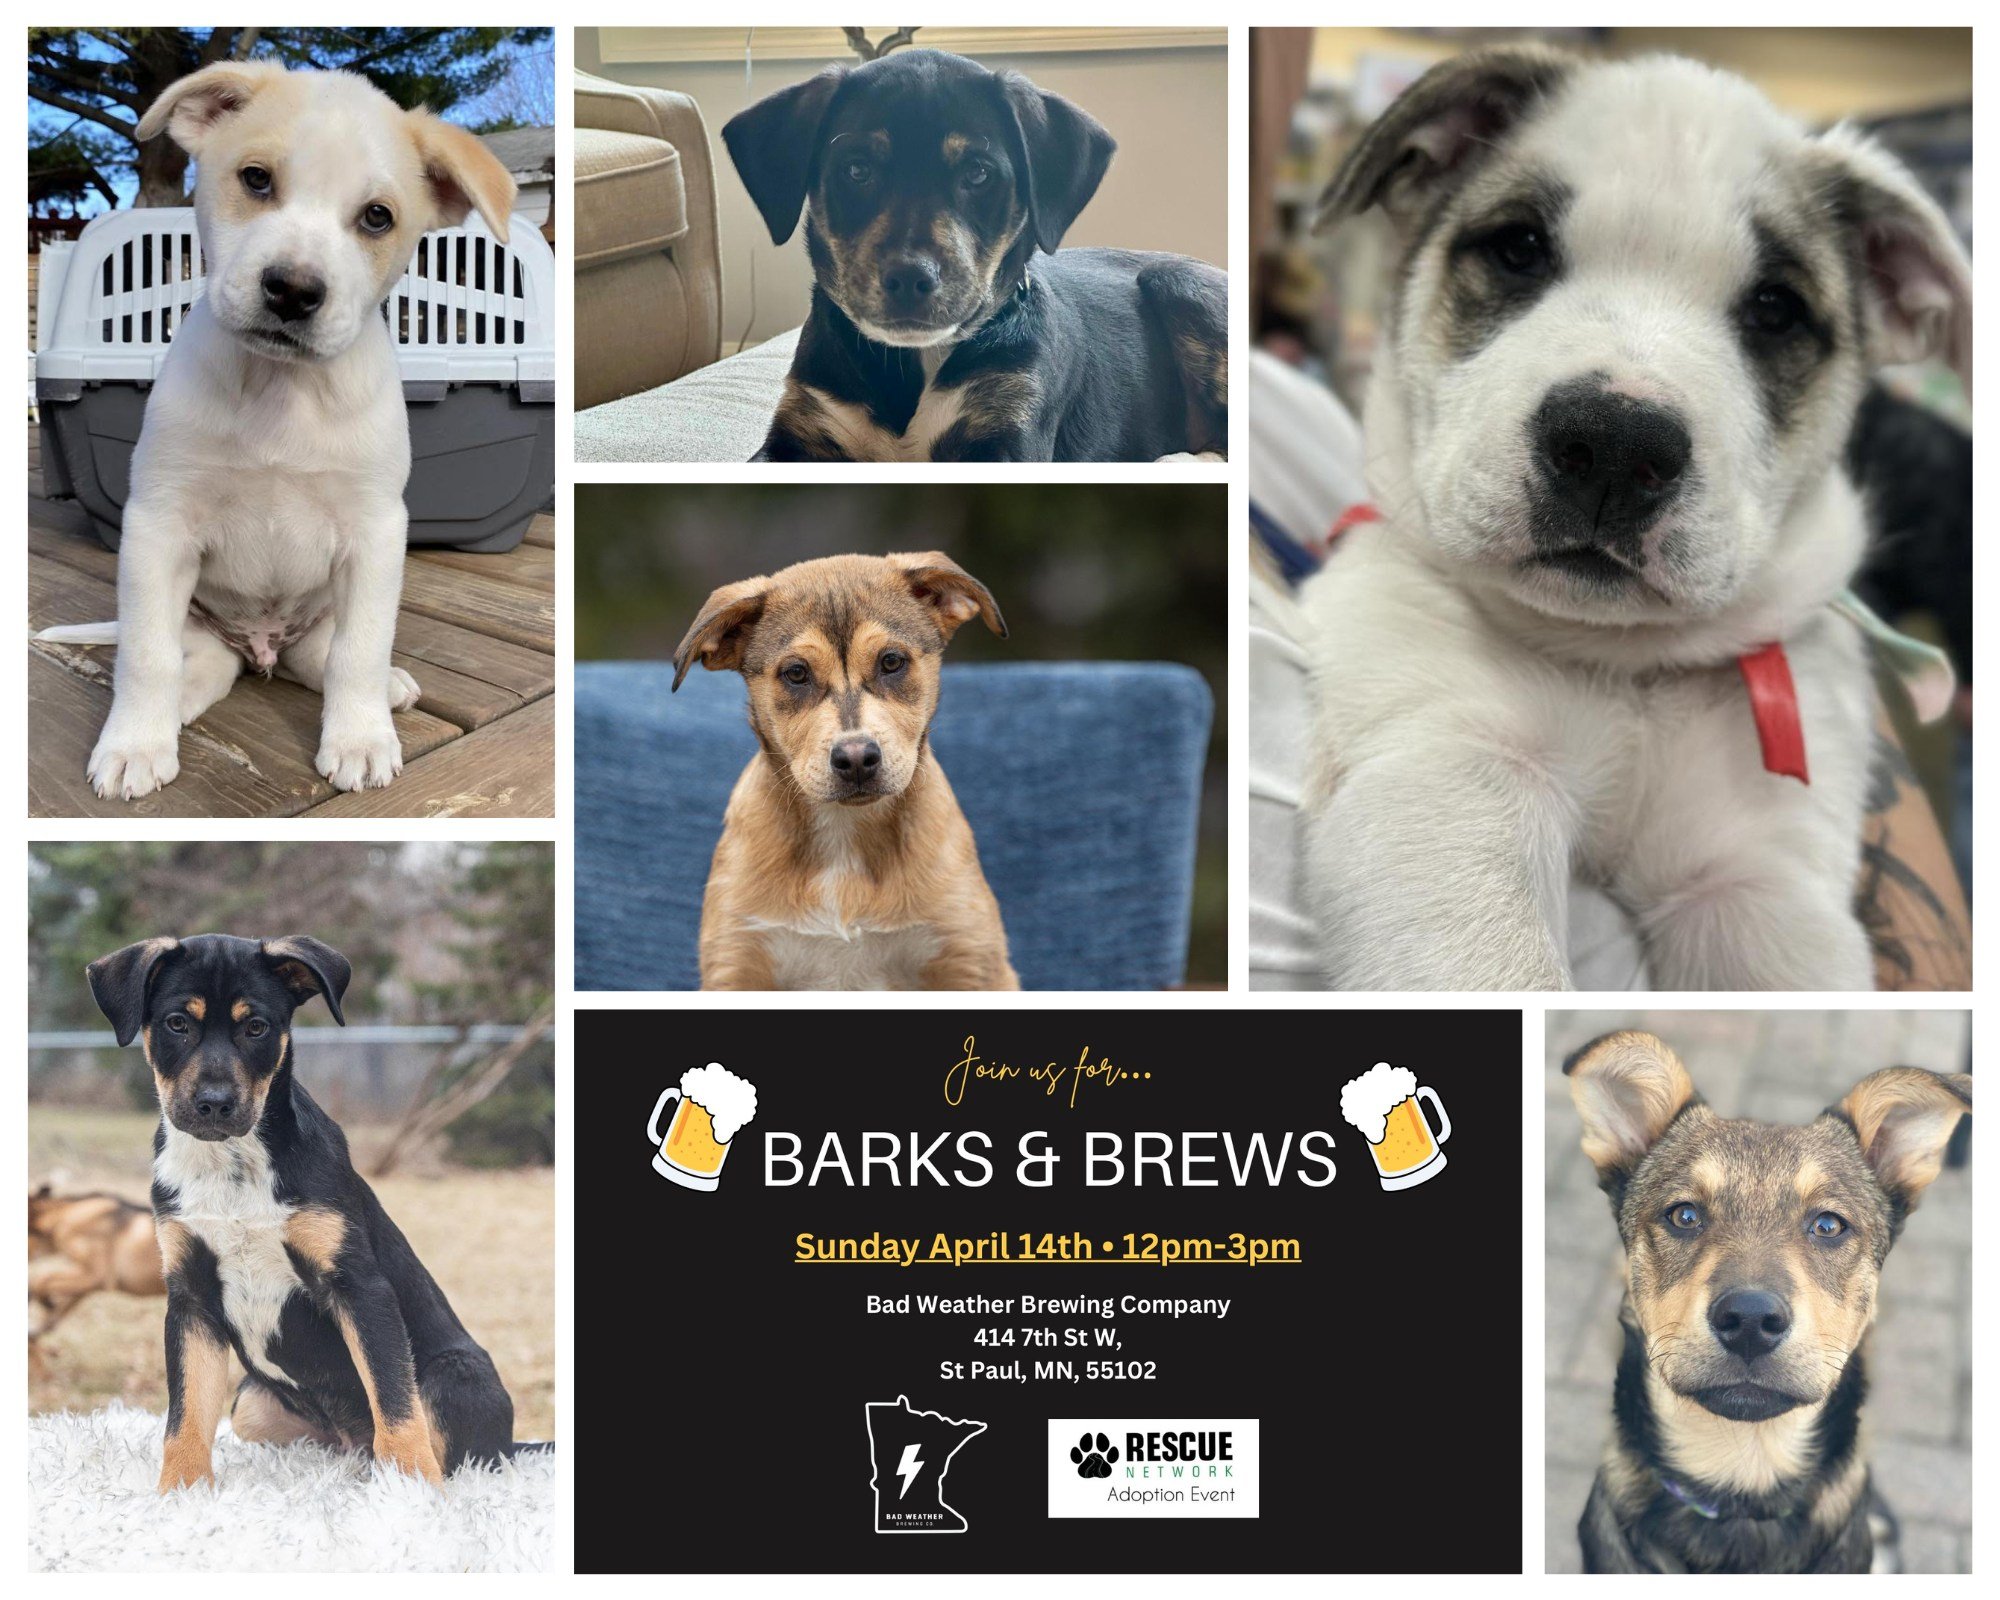 PUPPIES!

Sunday from noon to 3 we are hosting an Adoptable Pup Meet &amp; Greet with Rescue Network. Meet the volunteers and the pups  and find out ways to help support them. Perhaps maybe consider a forever home for one of the dogs. 

These are the